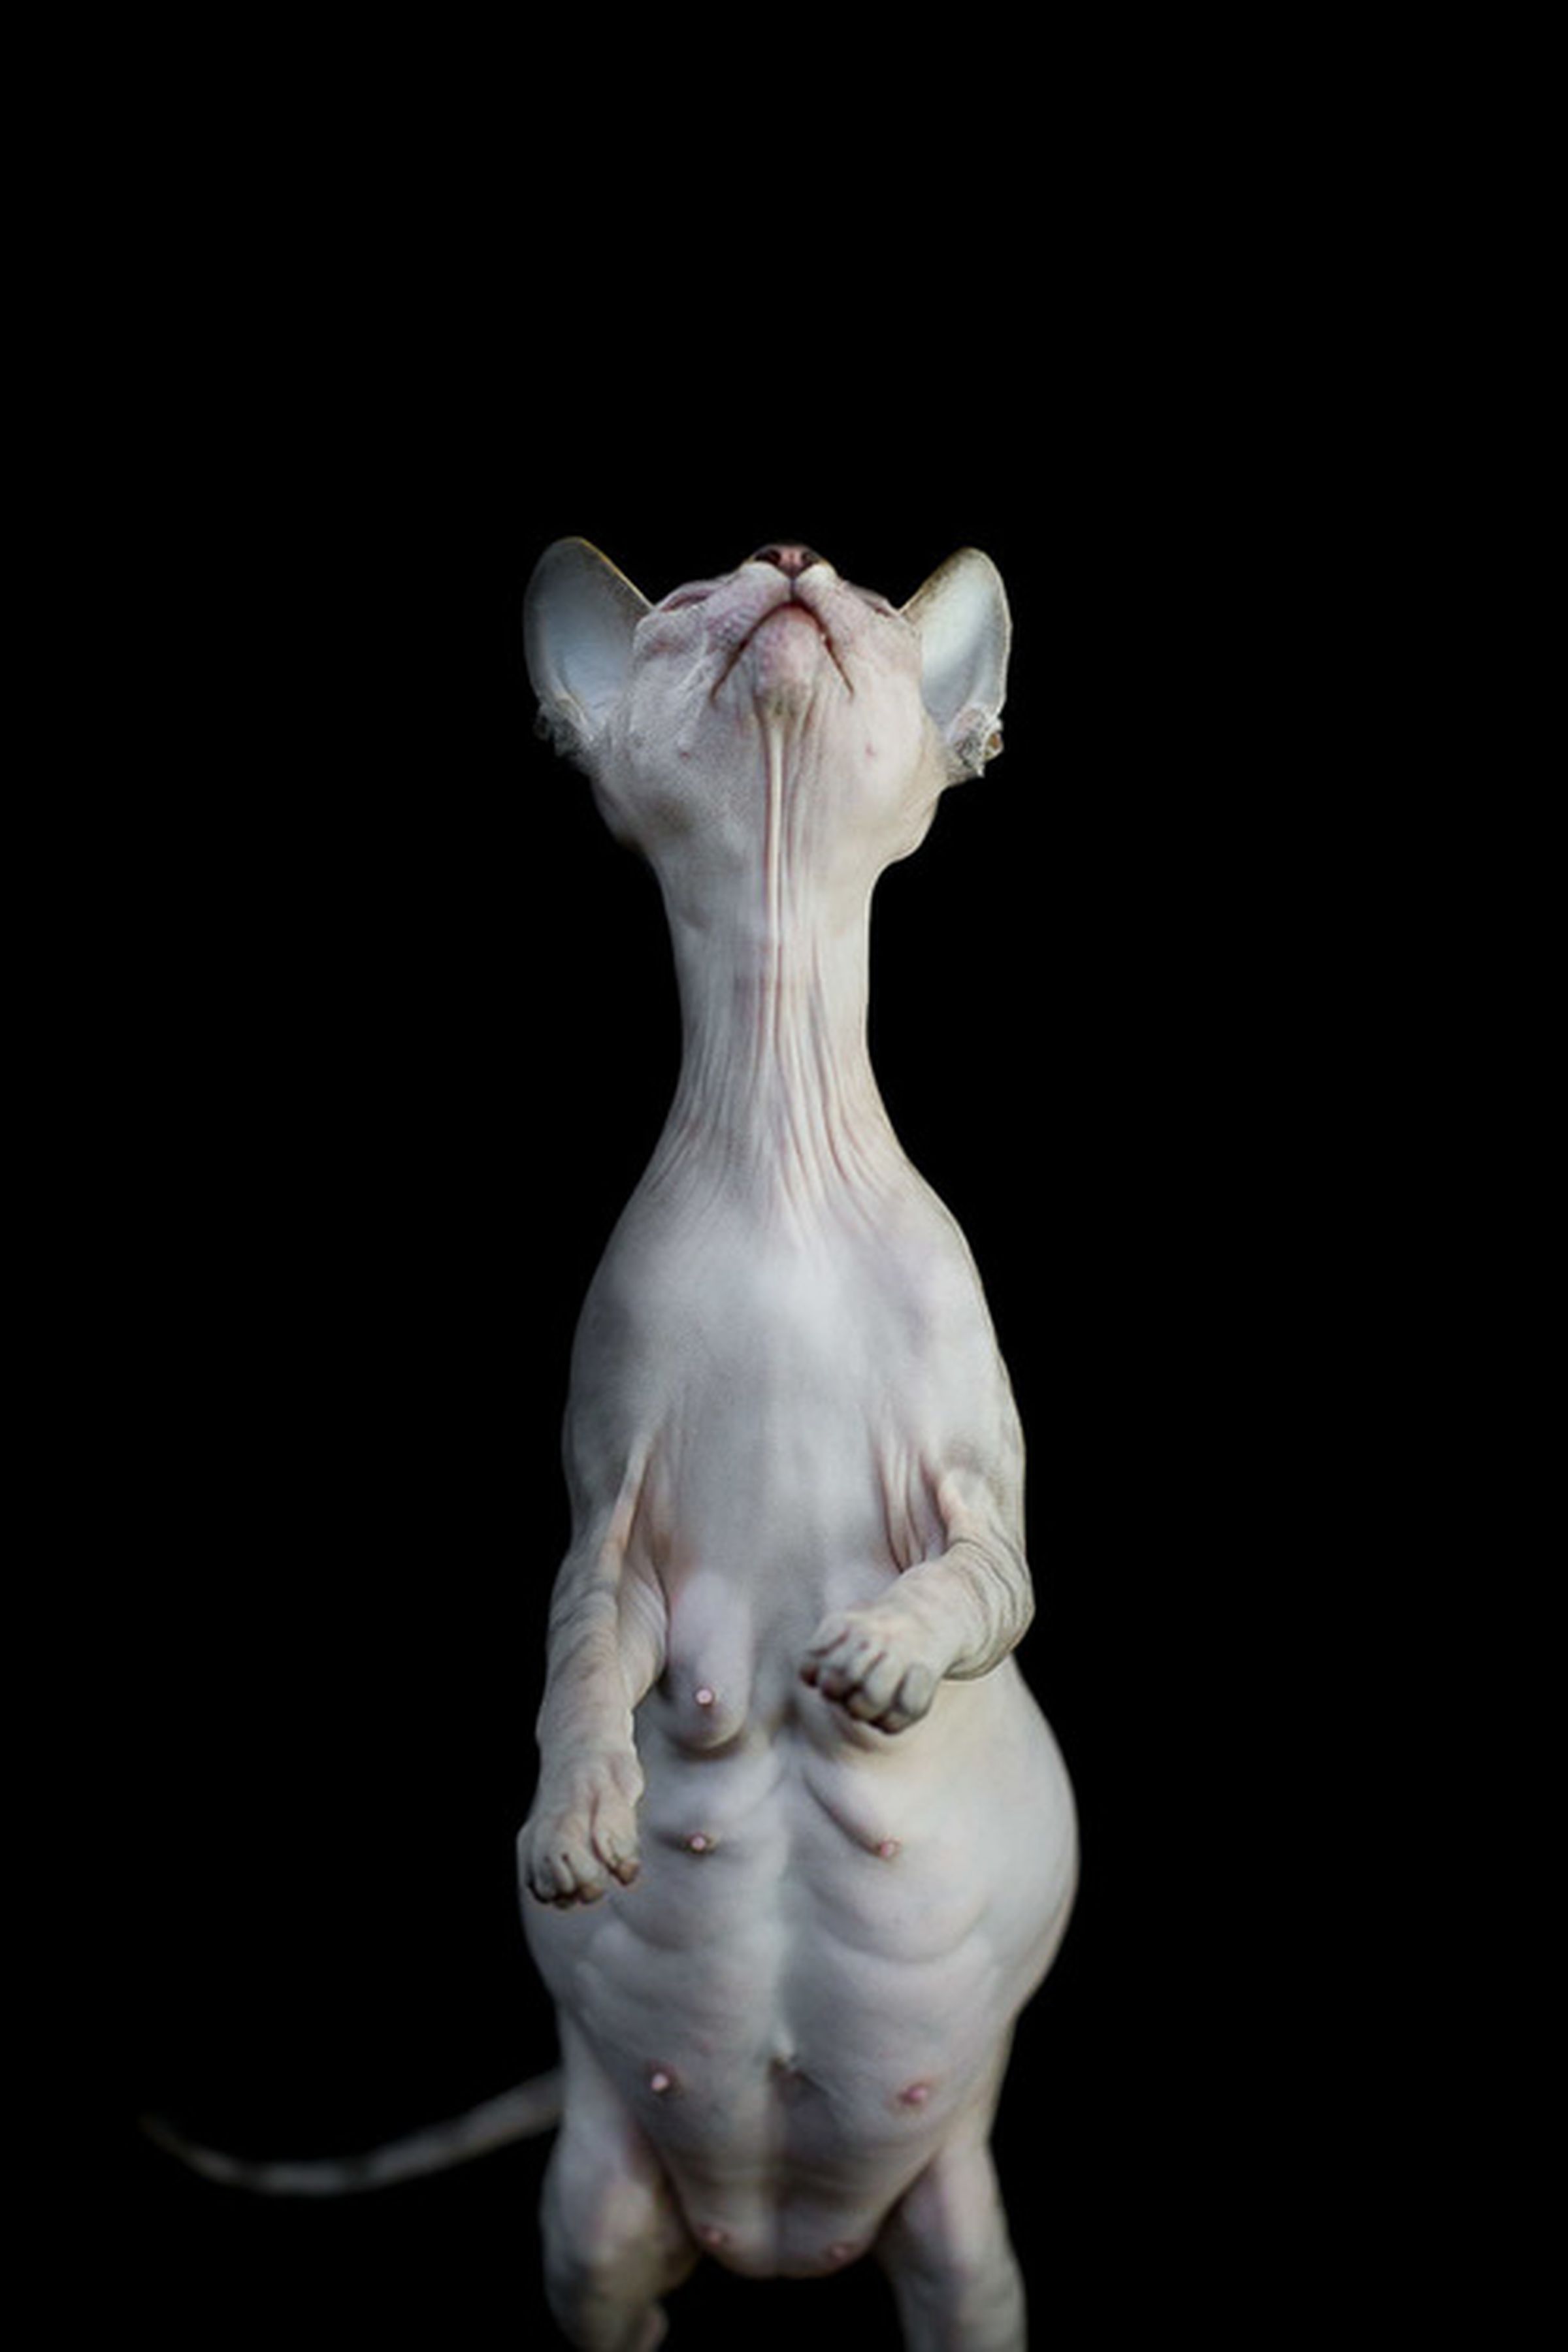 Sphynx cats by Alicia Ruis